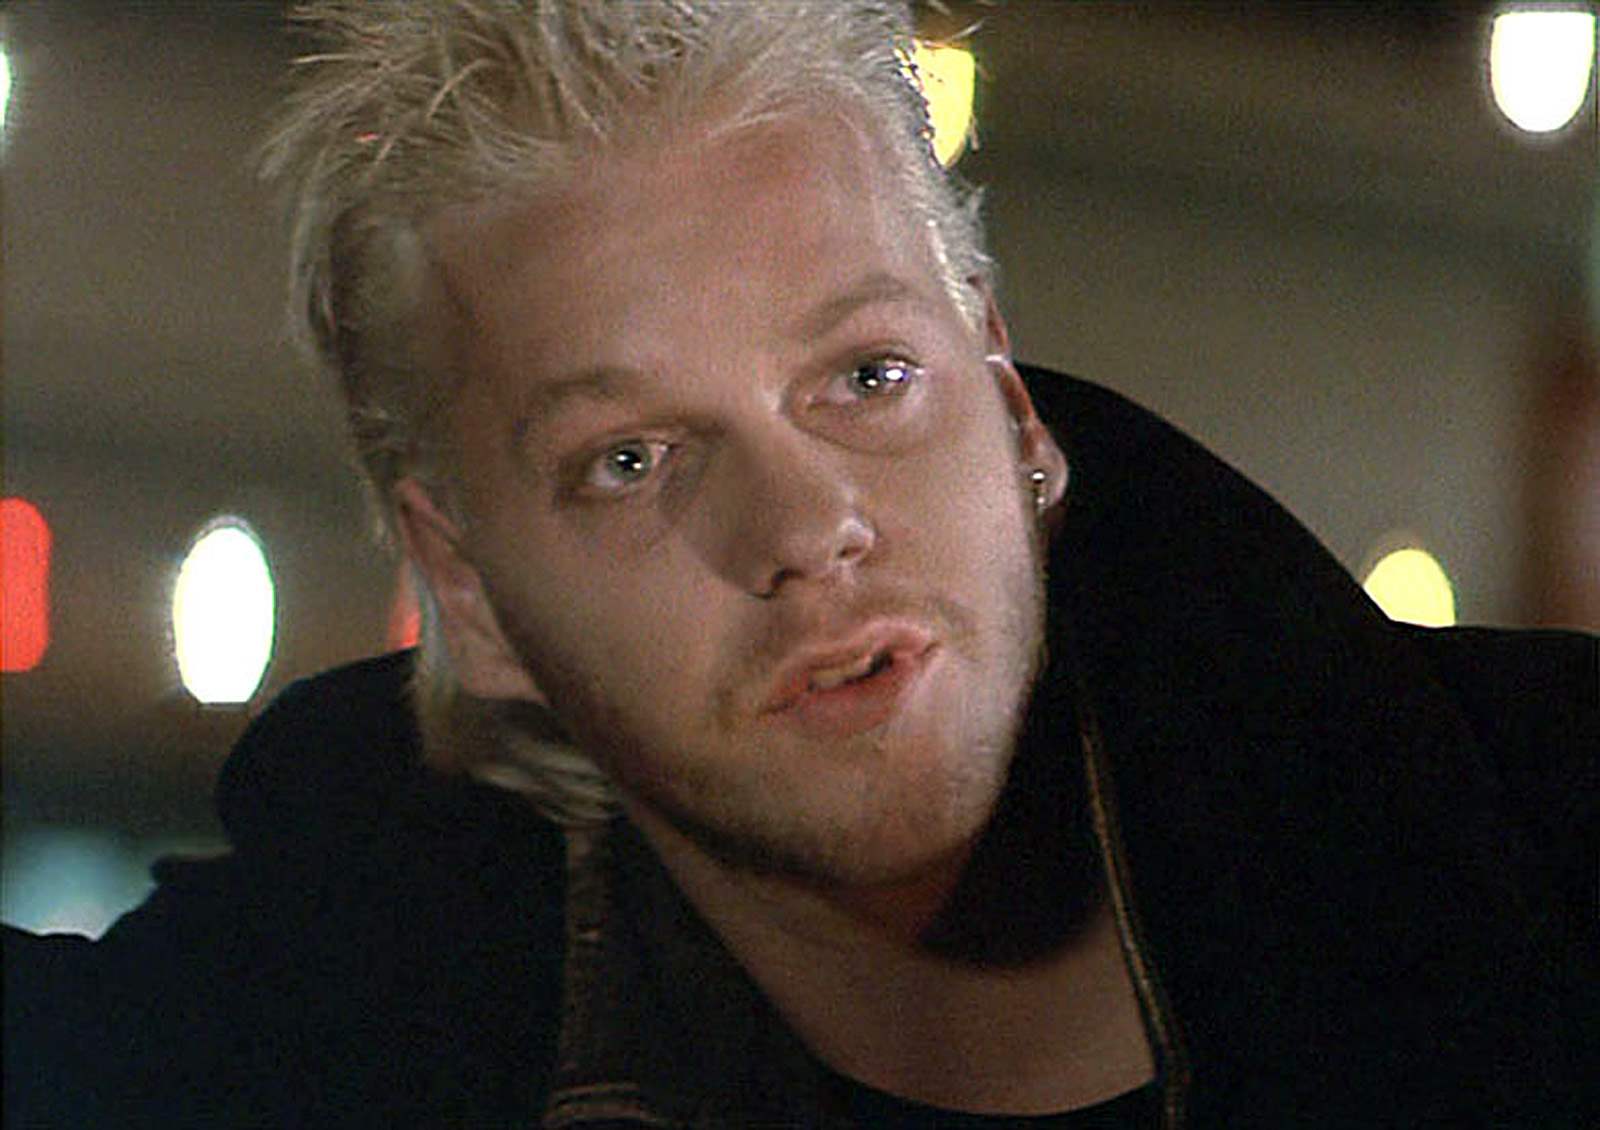 Keifer Sutherland in the movie "The Lost Boys".